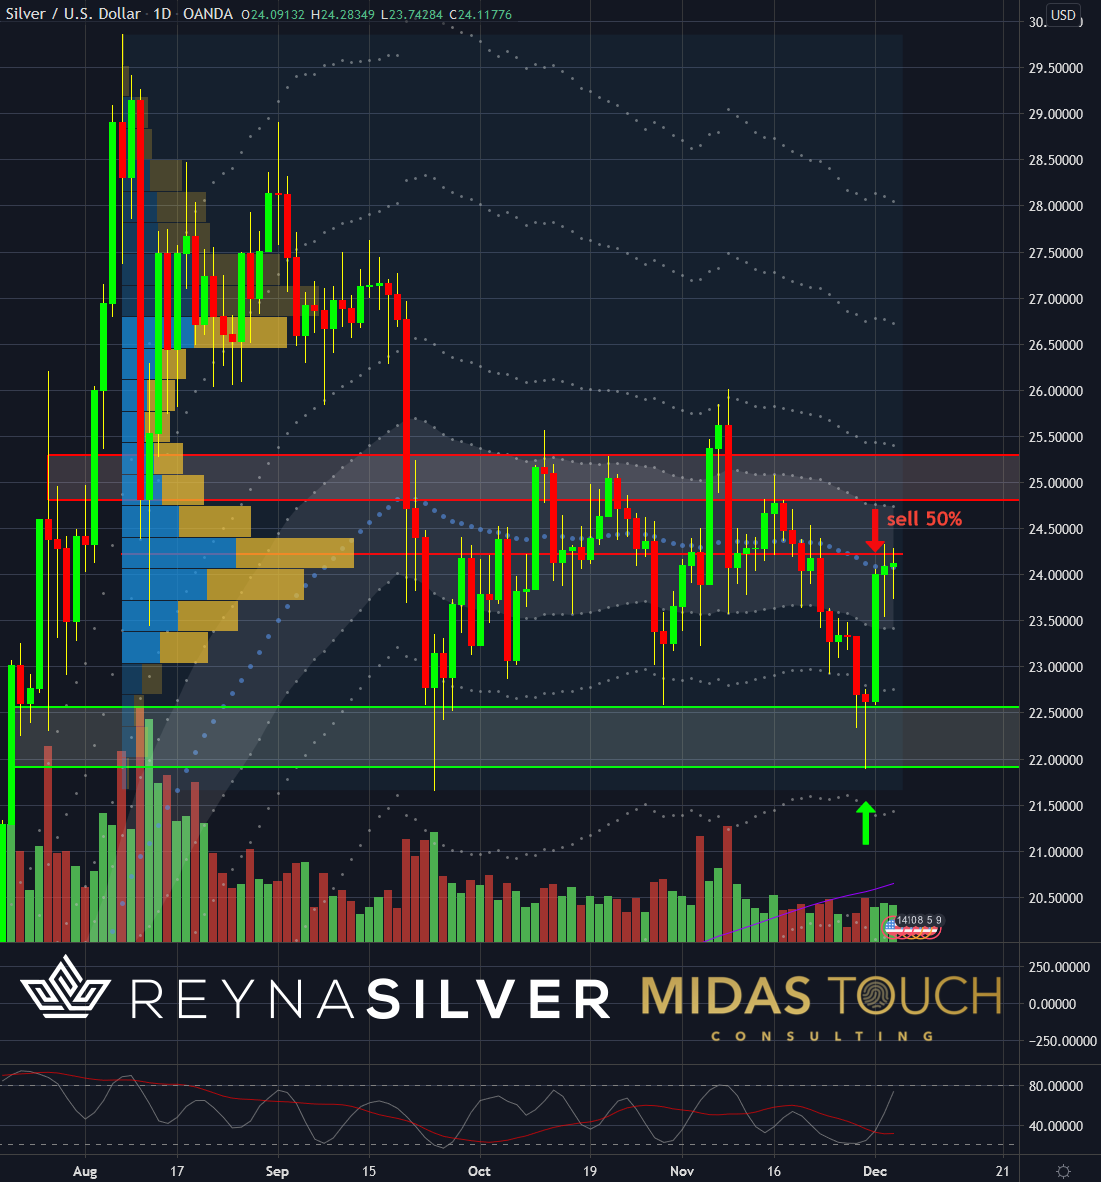 Silver in US Dollar, daily chart as of December 4th, 2020